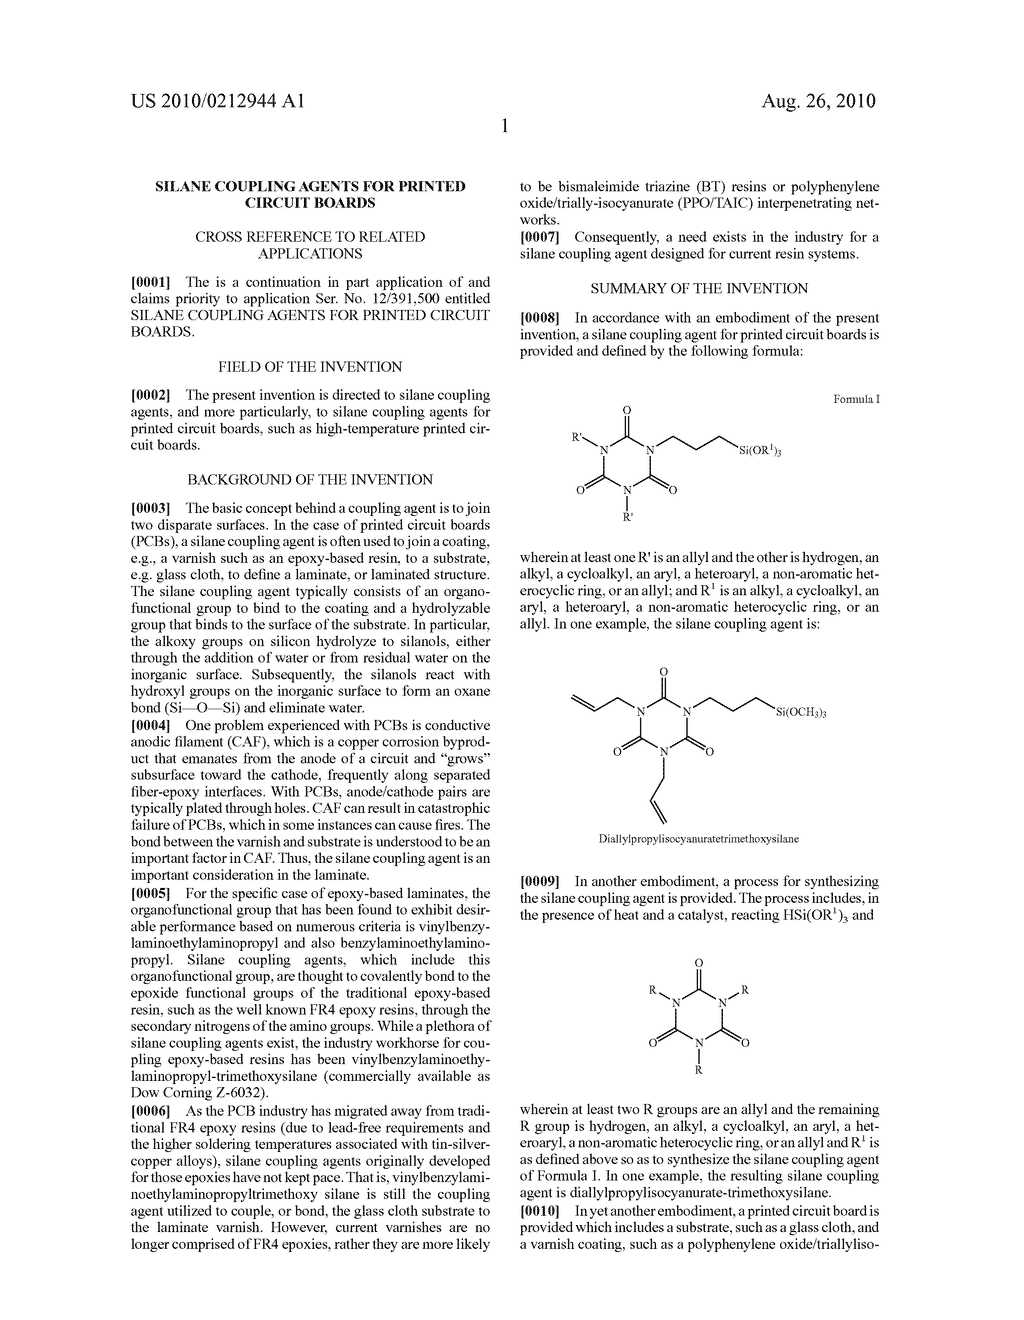 Silane Coupling Agents for Printed Circuit Boards - diagram, schematic, and image 02